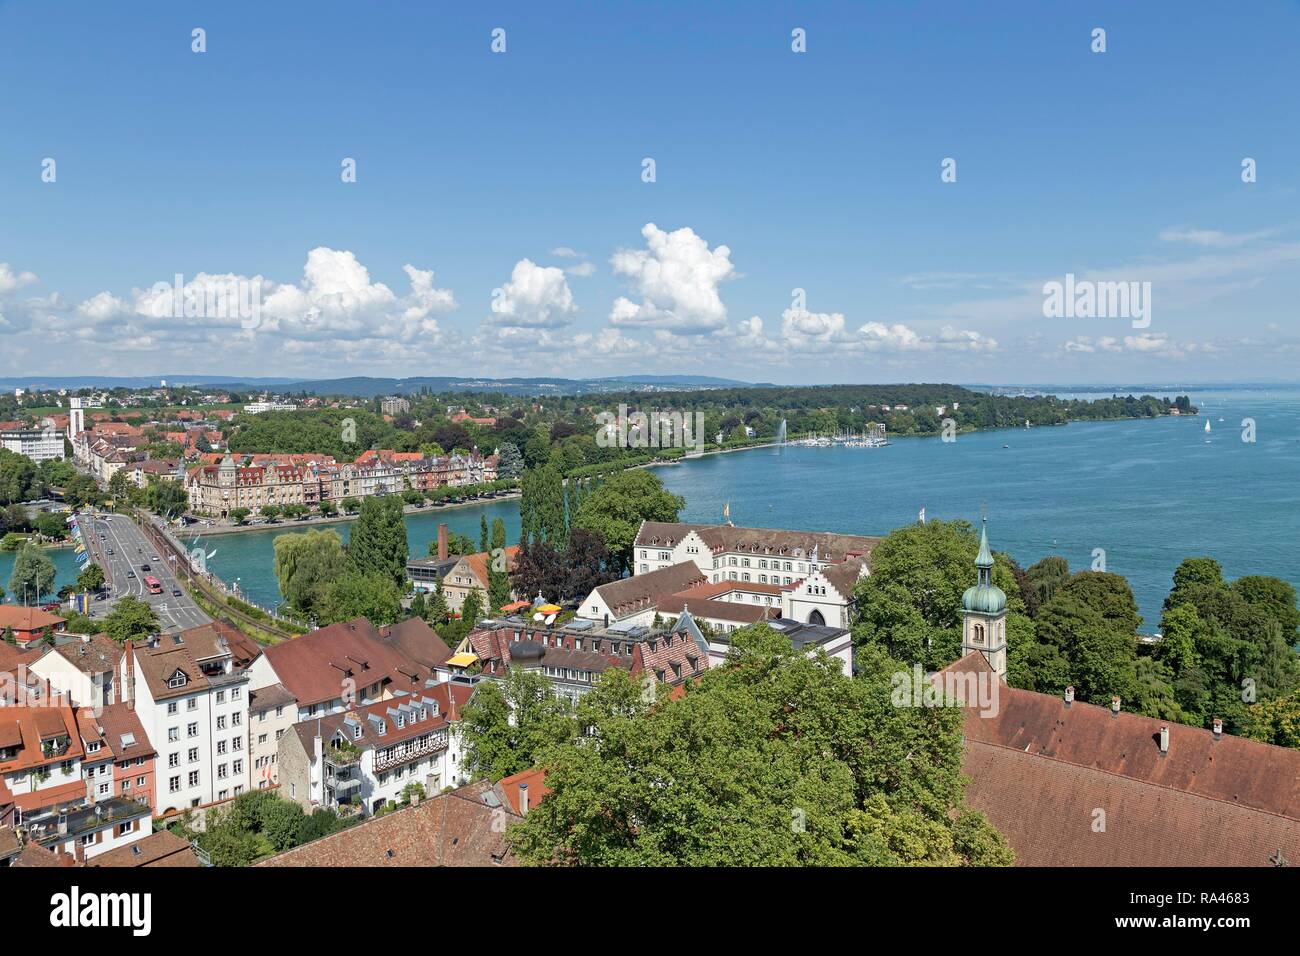 View from the tower of the Cathedral of the historic centre and Lake Constance, Konstanz, Baden-Württemberg, Germany Stock Photo